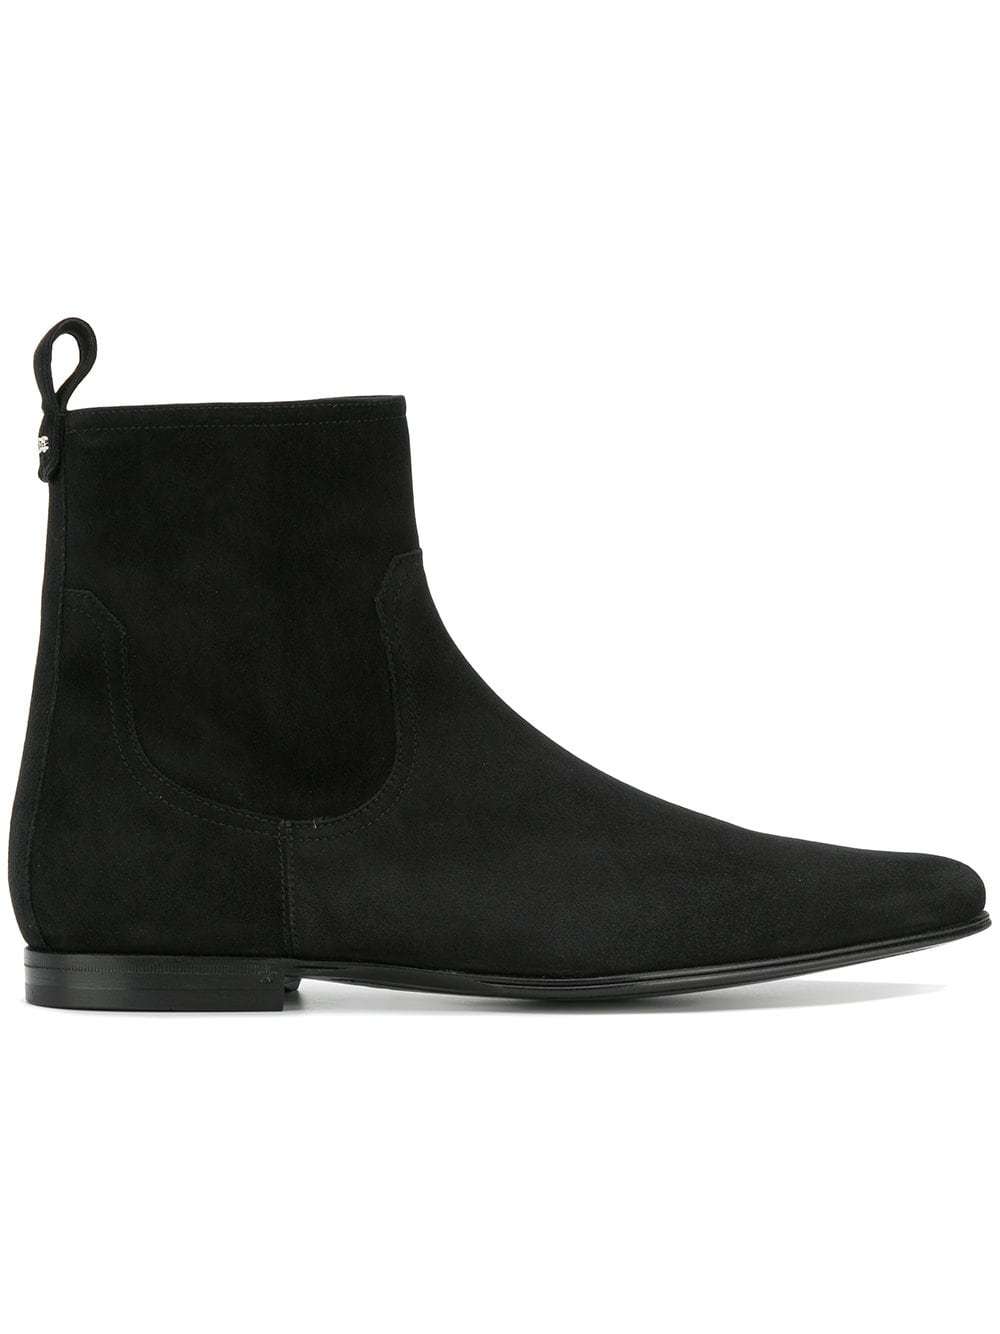 Dolce & Gabbana Suede Chelsea Ankle Boots